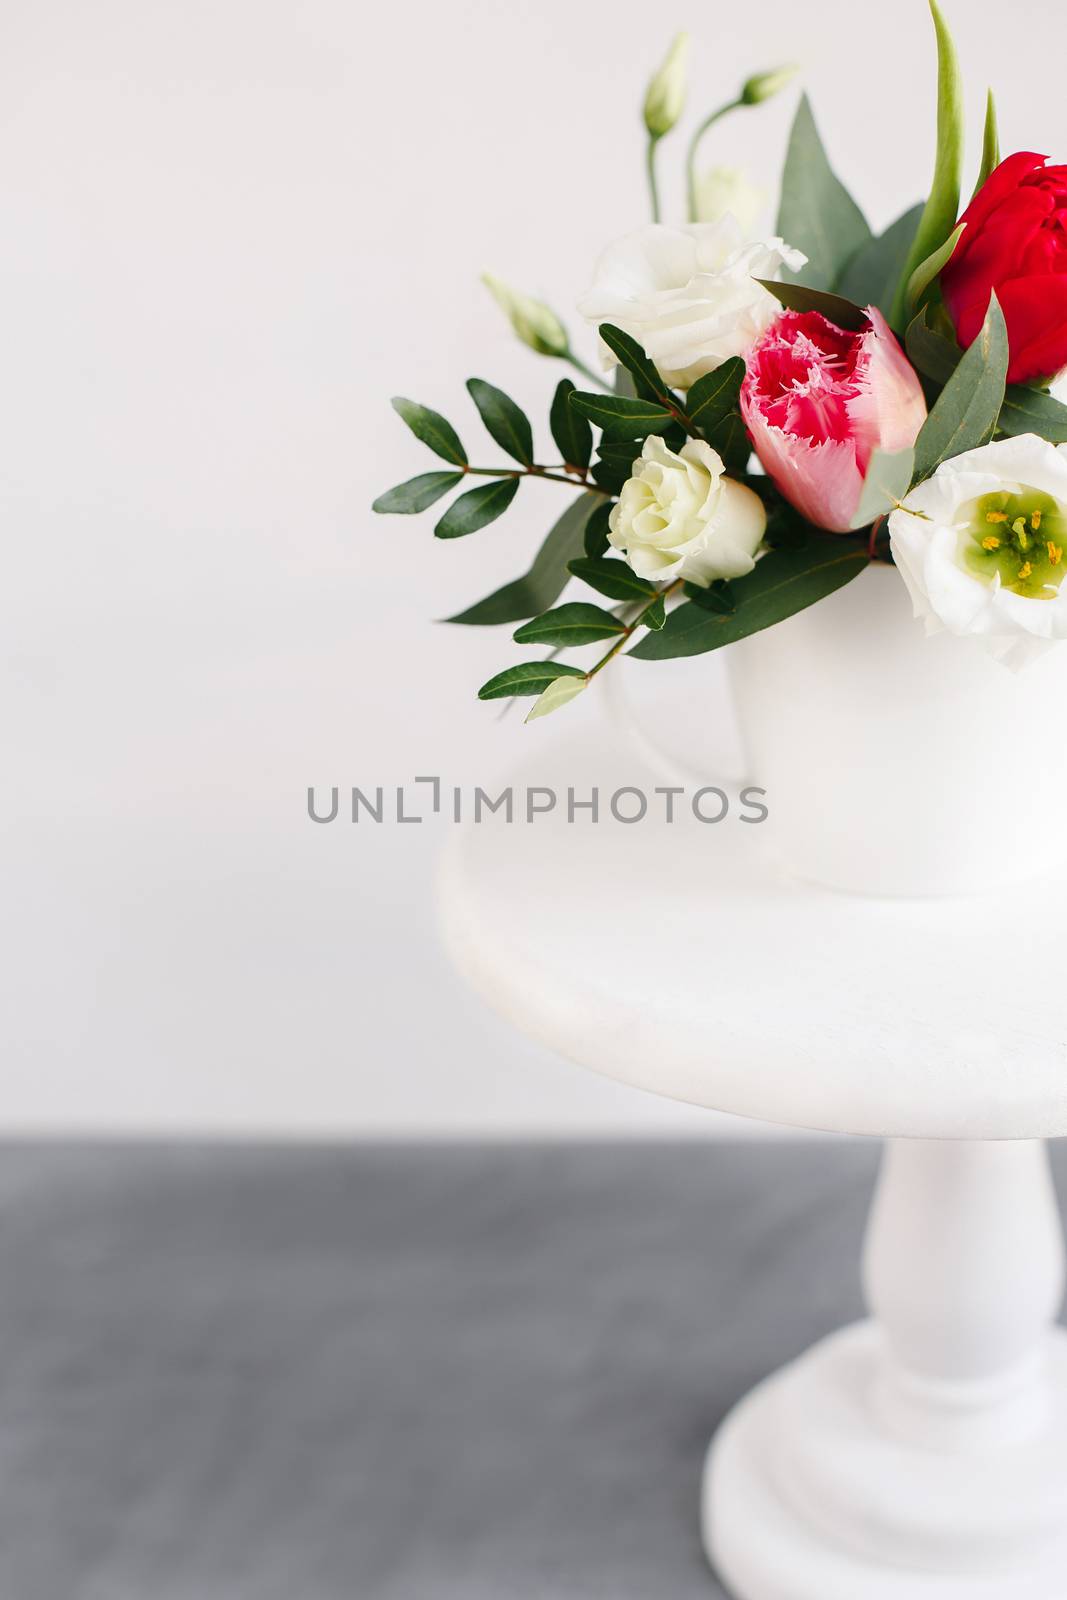 Spring bouquet in white vase on wooden white stand. Roses, tulips and lisianthus